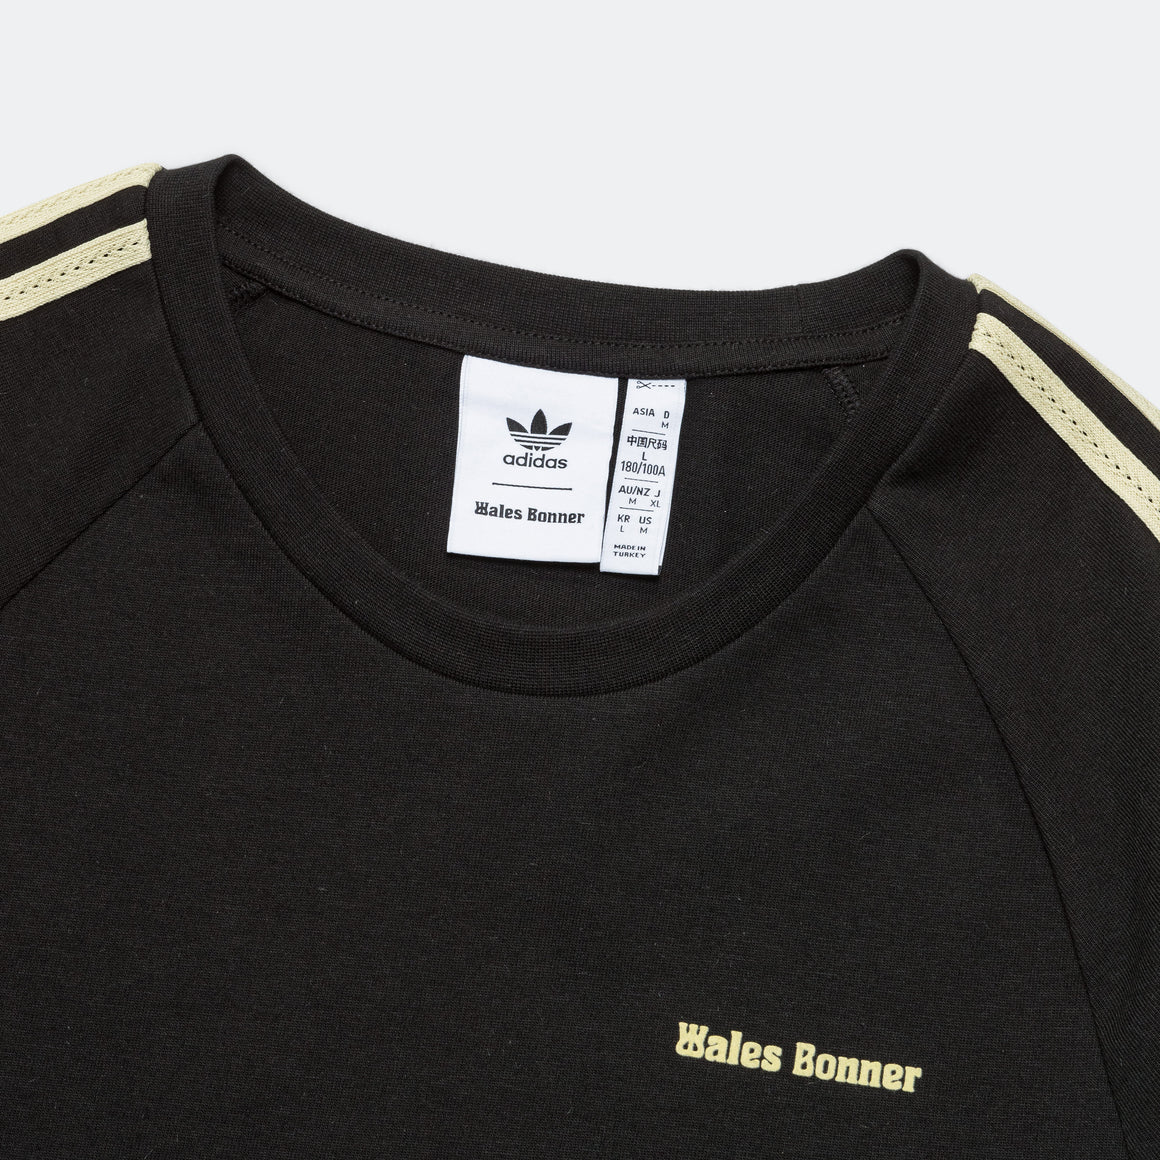 adidas - Statement Graphic Tee × Wales Bonner - Black - UP THERE